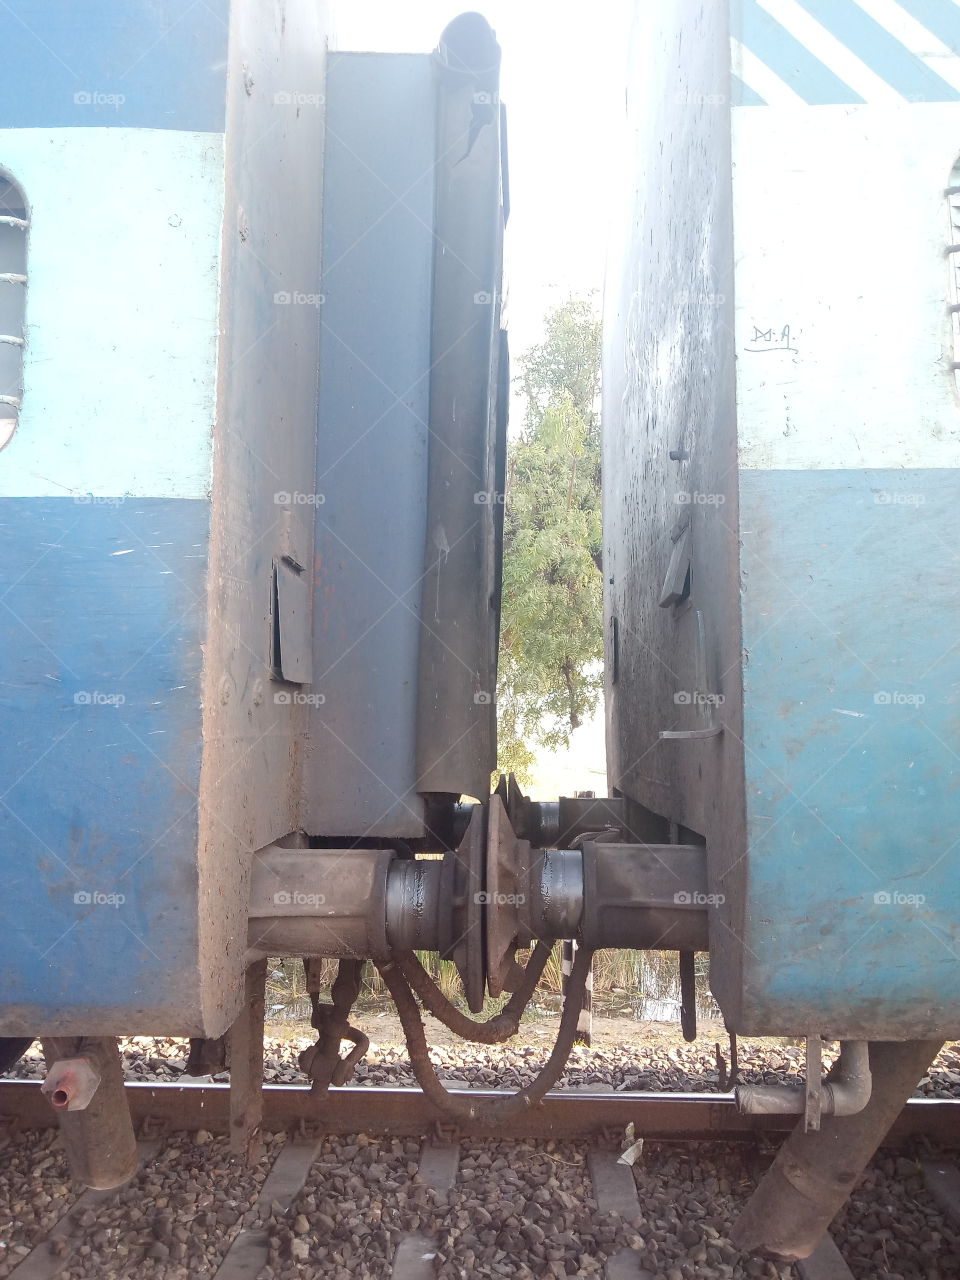 this is railway bogie joint.